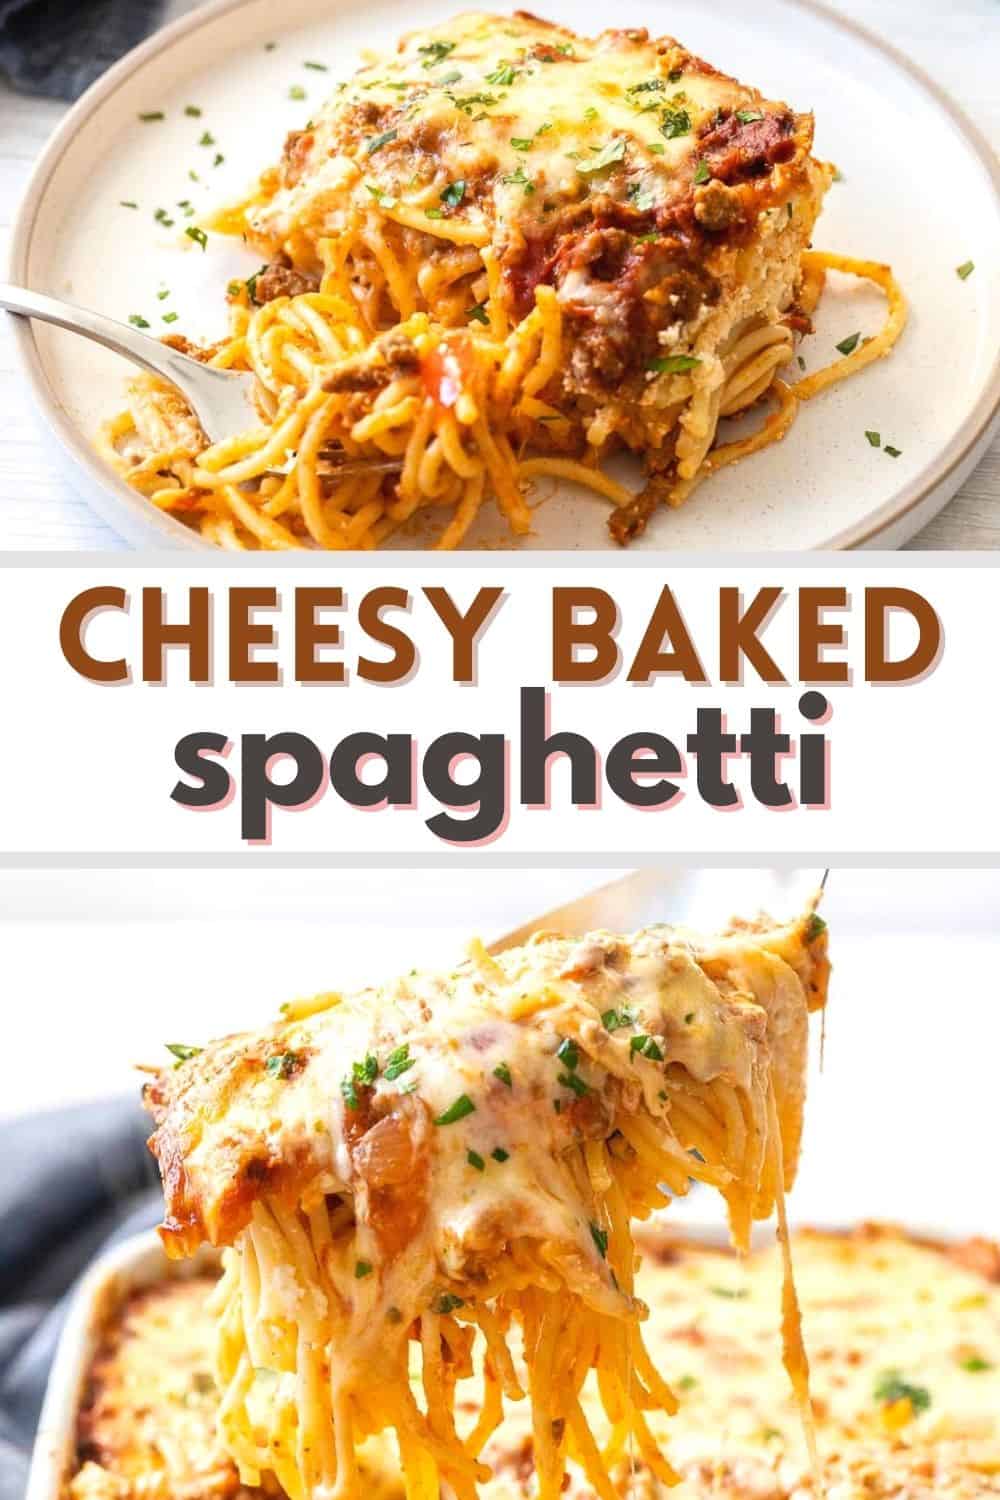 Cheesy baked spaghetti is the perfect comfort dish for any pasta lover. This easy baked pasta recipe includes layers of noodles, Ricotta, mozzarella, Parmesan and meaty sauce.